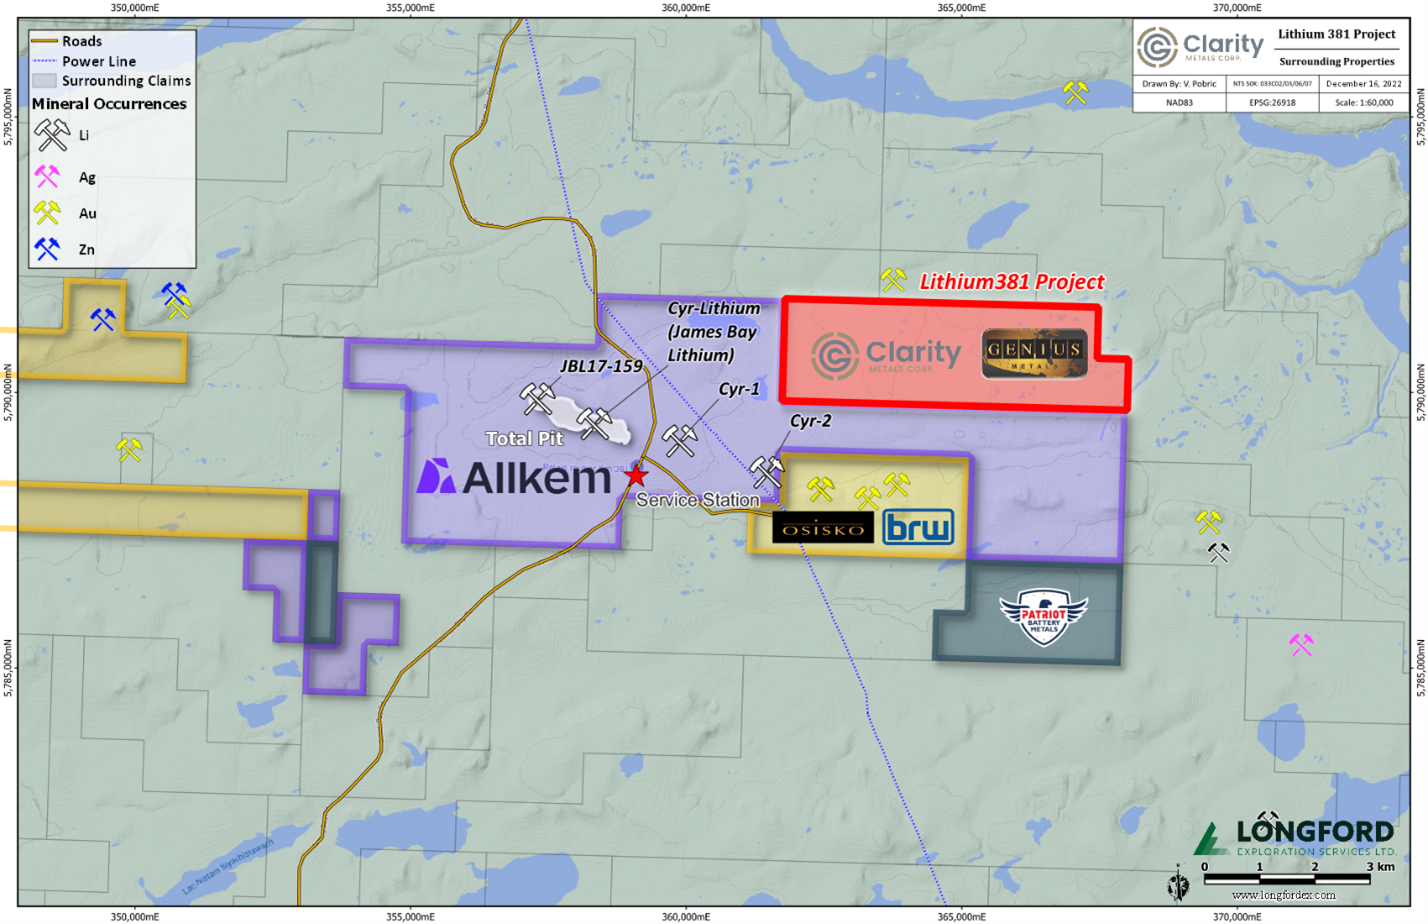 Clarity Metals Announces Exploration Efforts at the Lithium381 Property